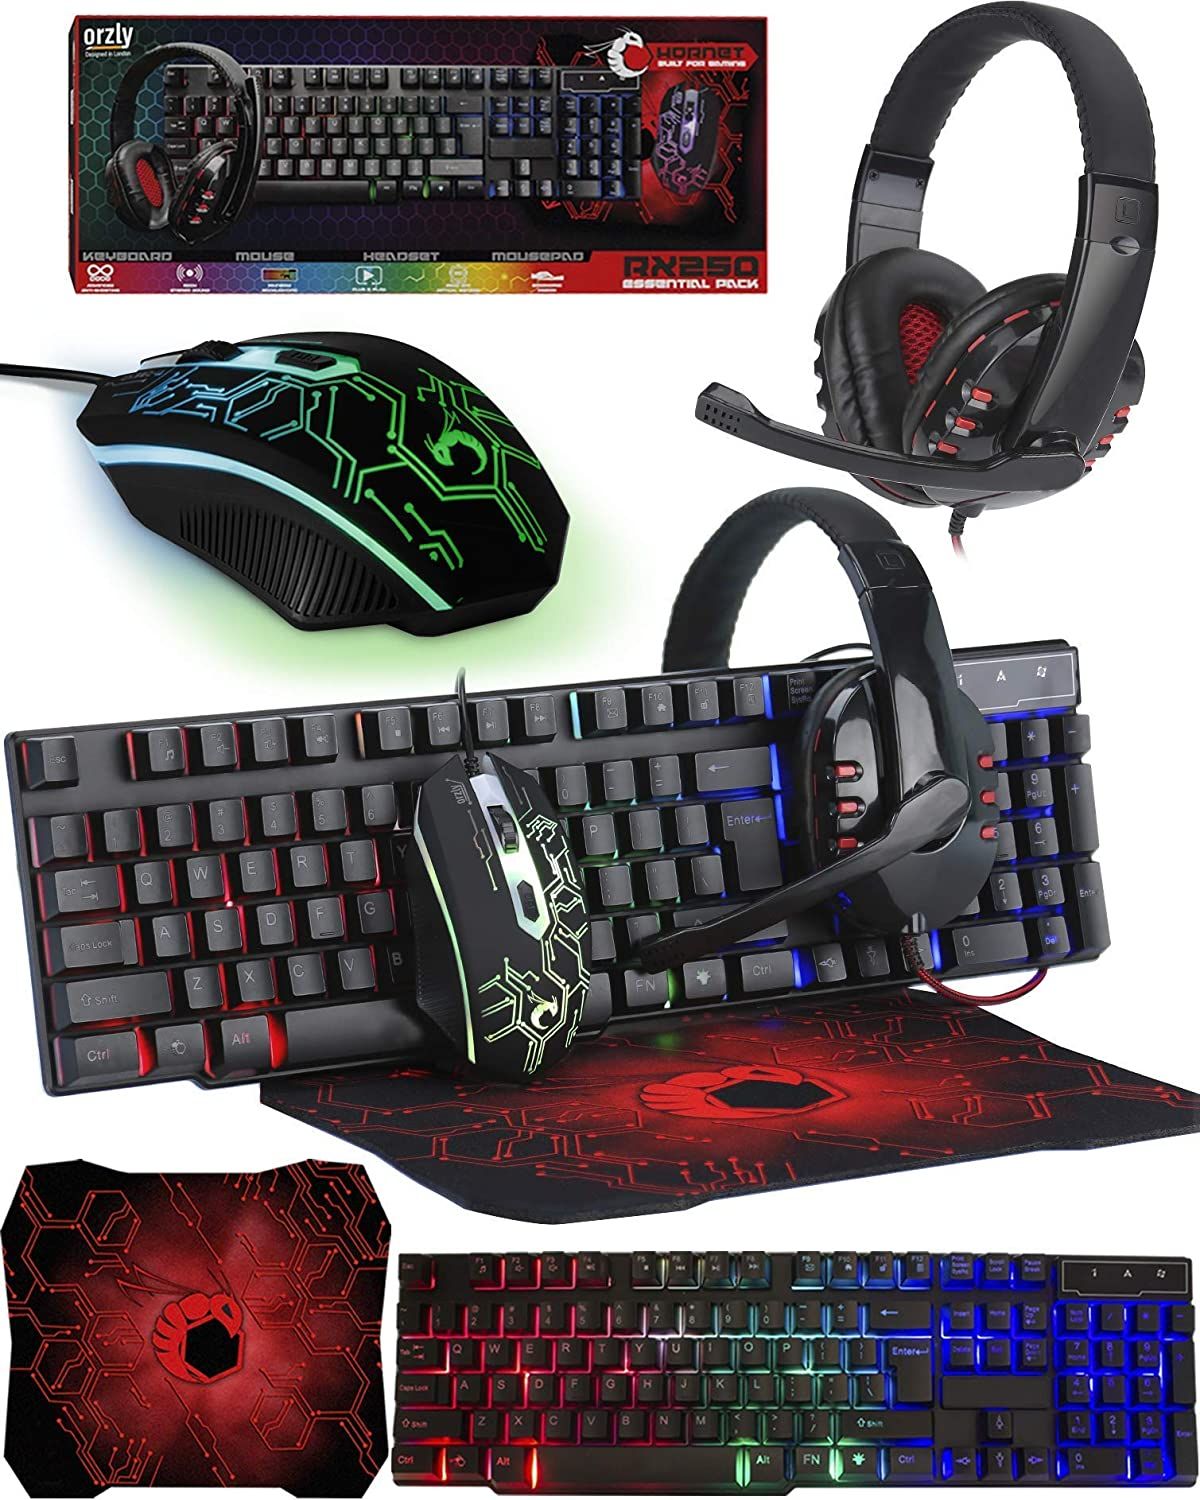 Orzly Gaming Keyboard and Mouse